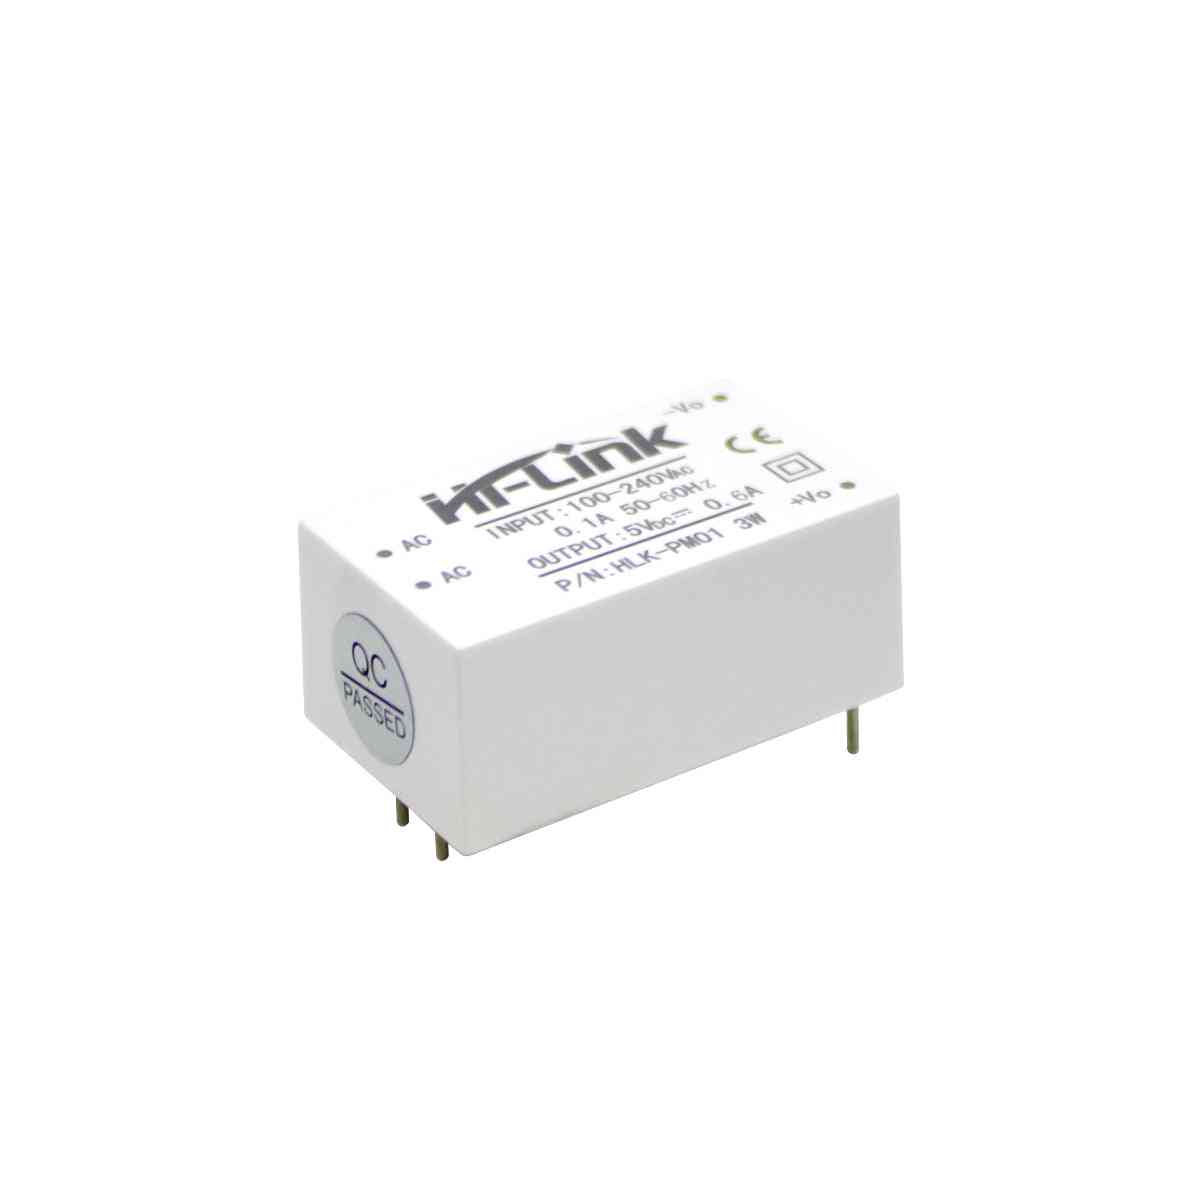 Smart-remote hlk-pm01 witte ac / dc voedingsmodule -